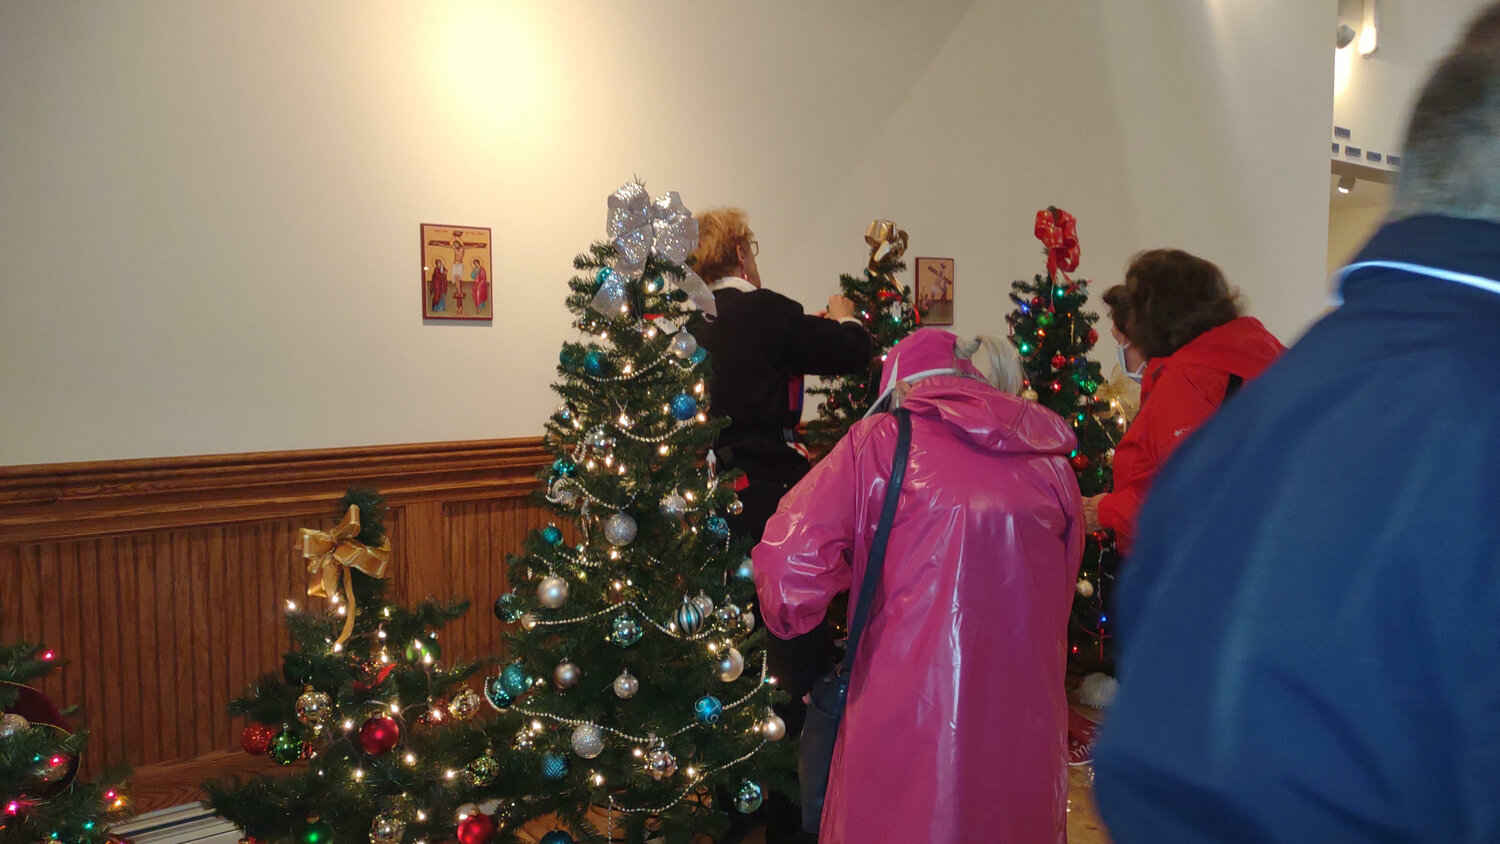 People admiring the fully decorated Christmas trees.